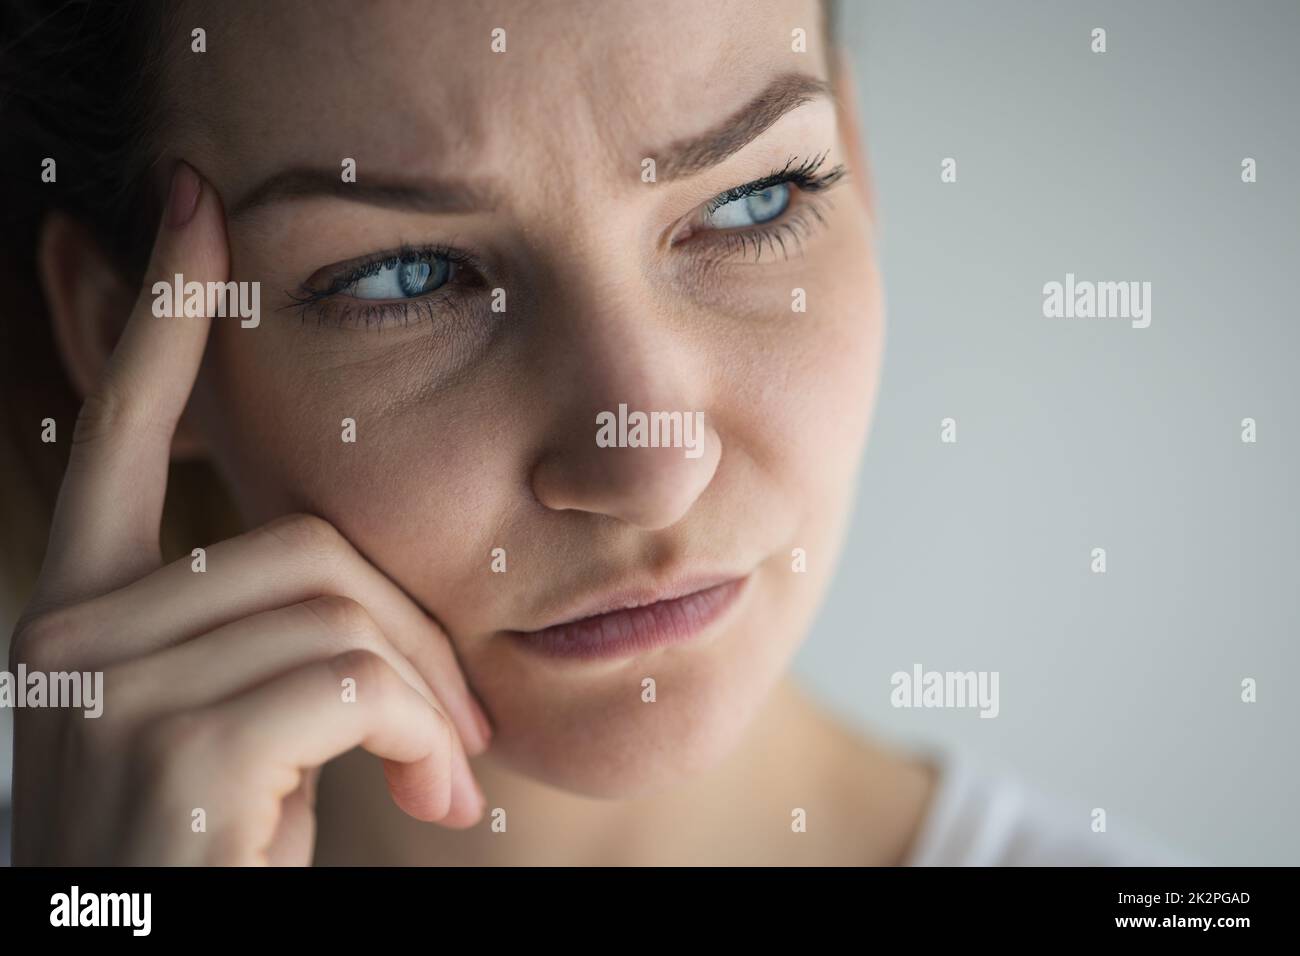 Anxious, worried, stressed young woman looking pensive, pondering, deep in thoughts. Stock Photo